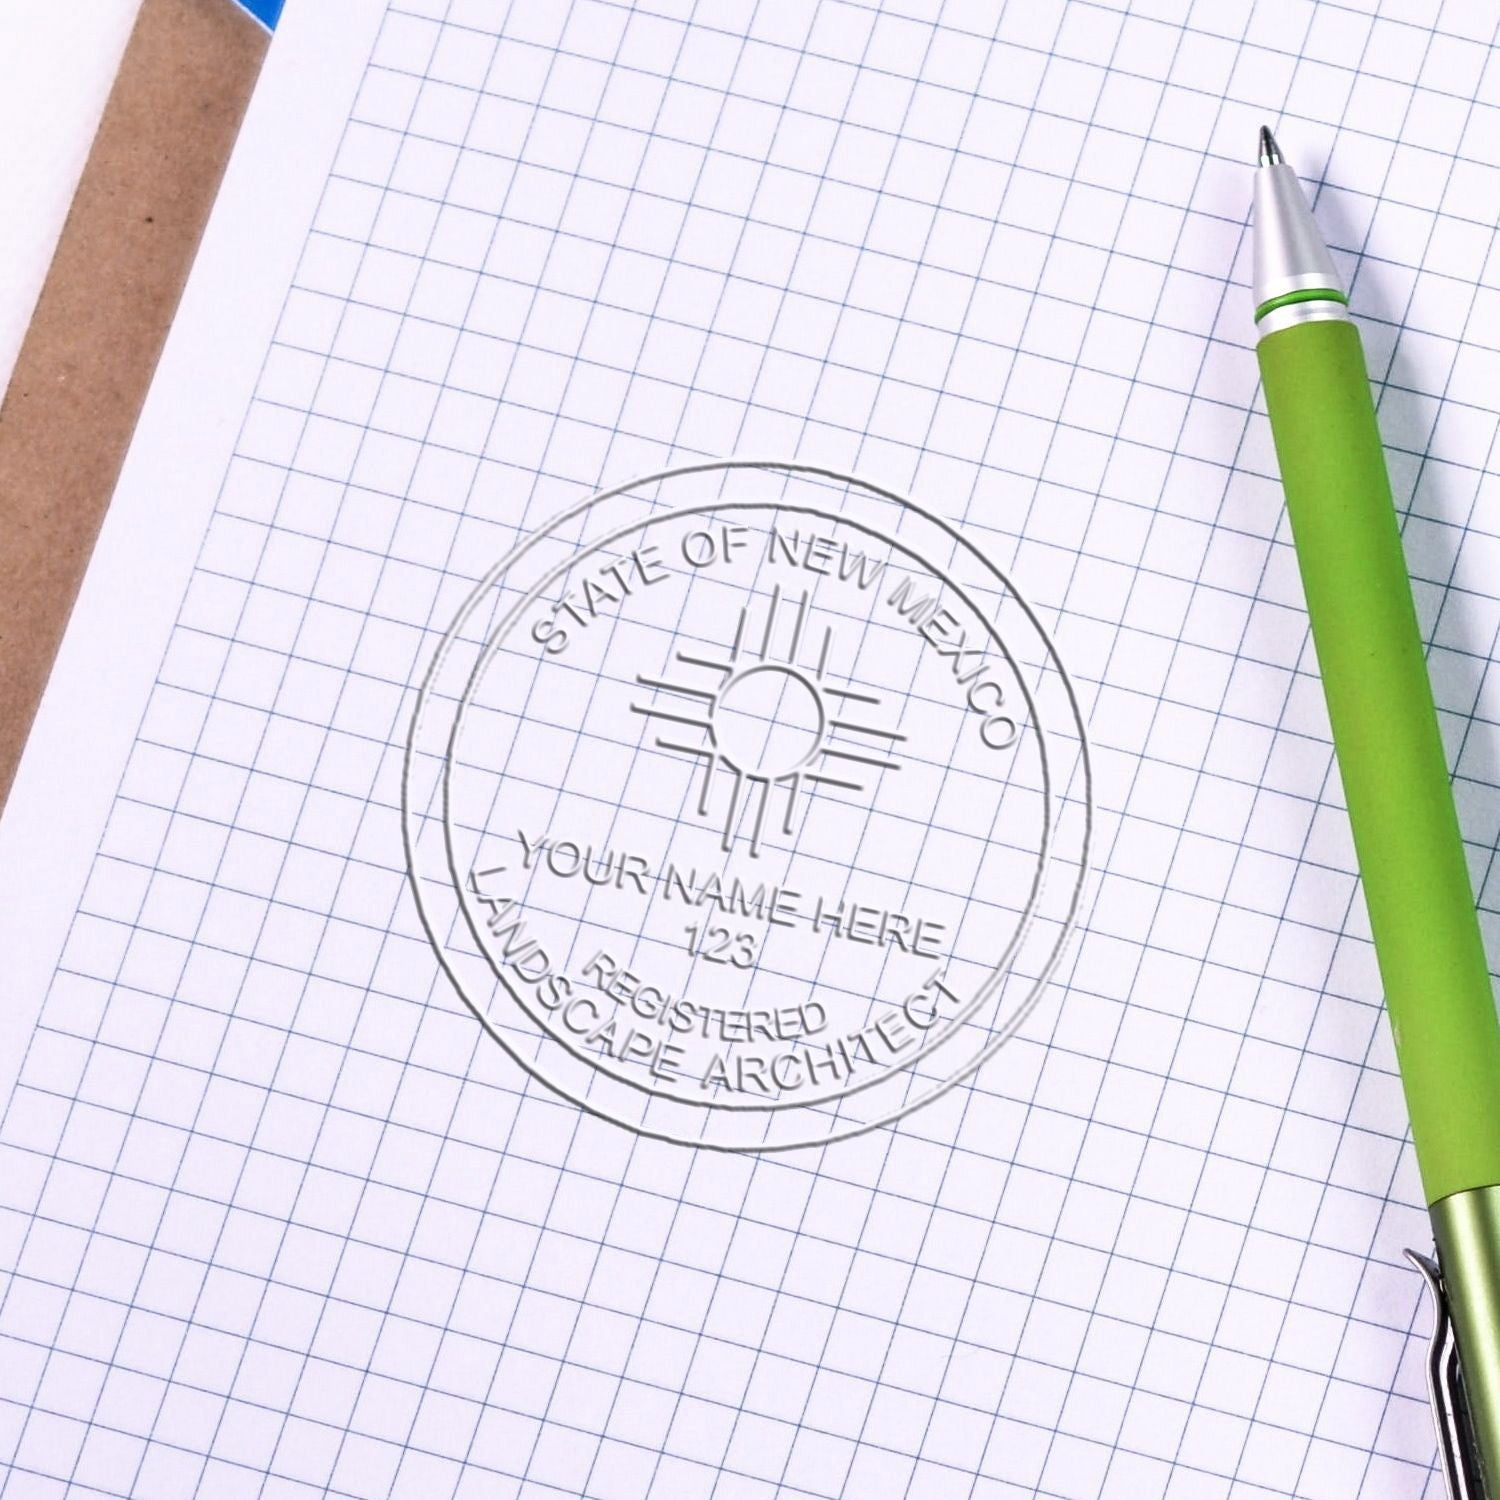 An alternative view of the Gift New Mexico Landscape Architect Seal stamped on a sheet of paper showing the image in use